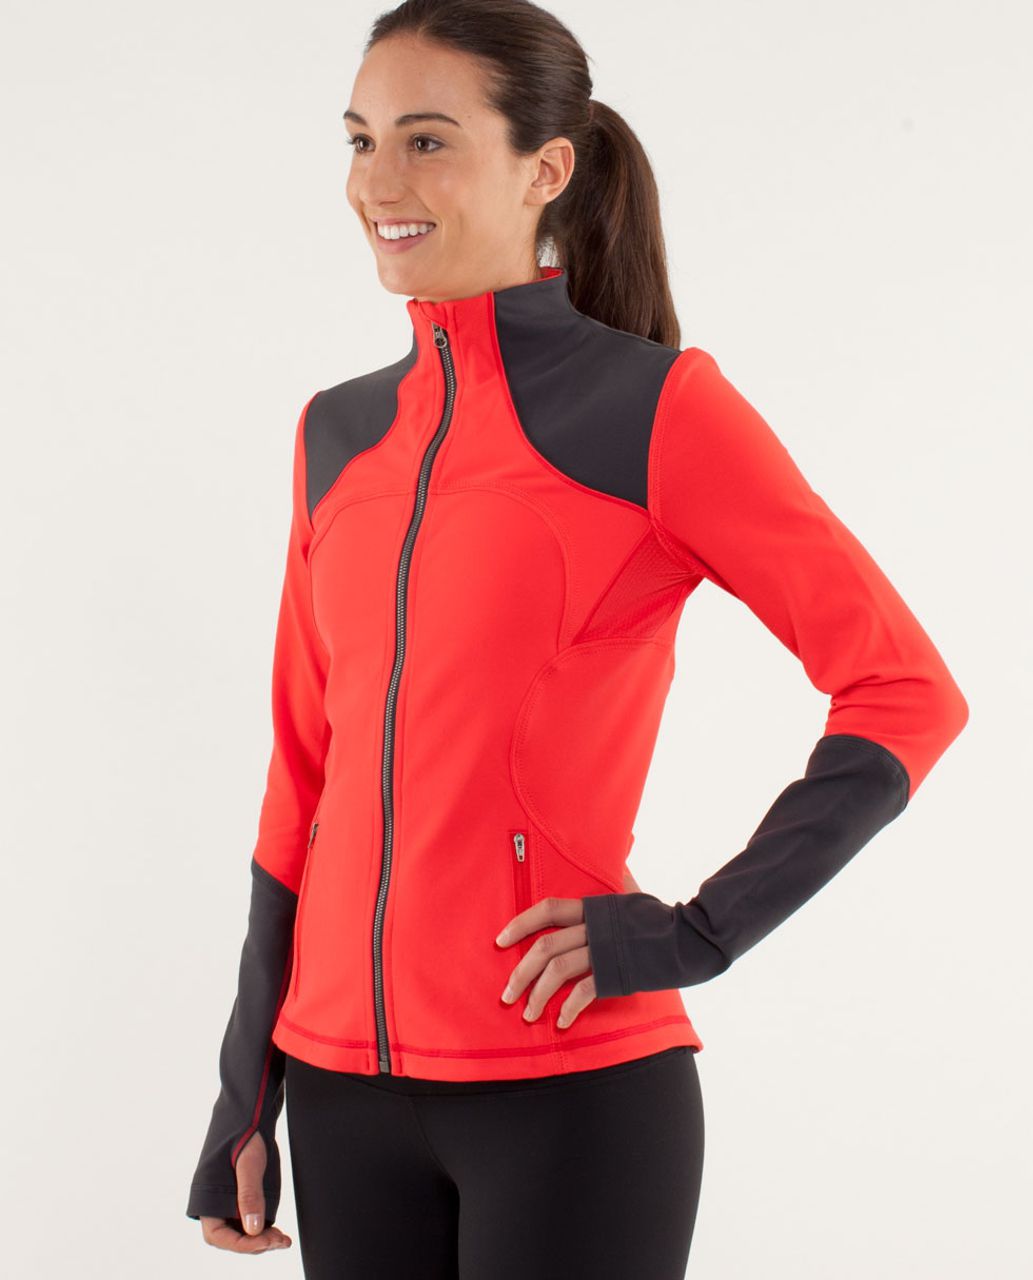 Love Red Contempo Jacket and New Lulu Shoppers - The Sweat Edit